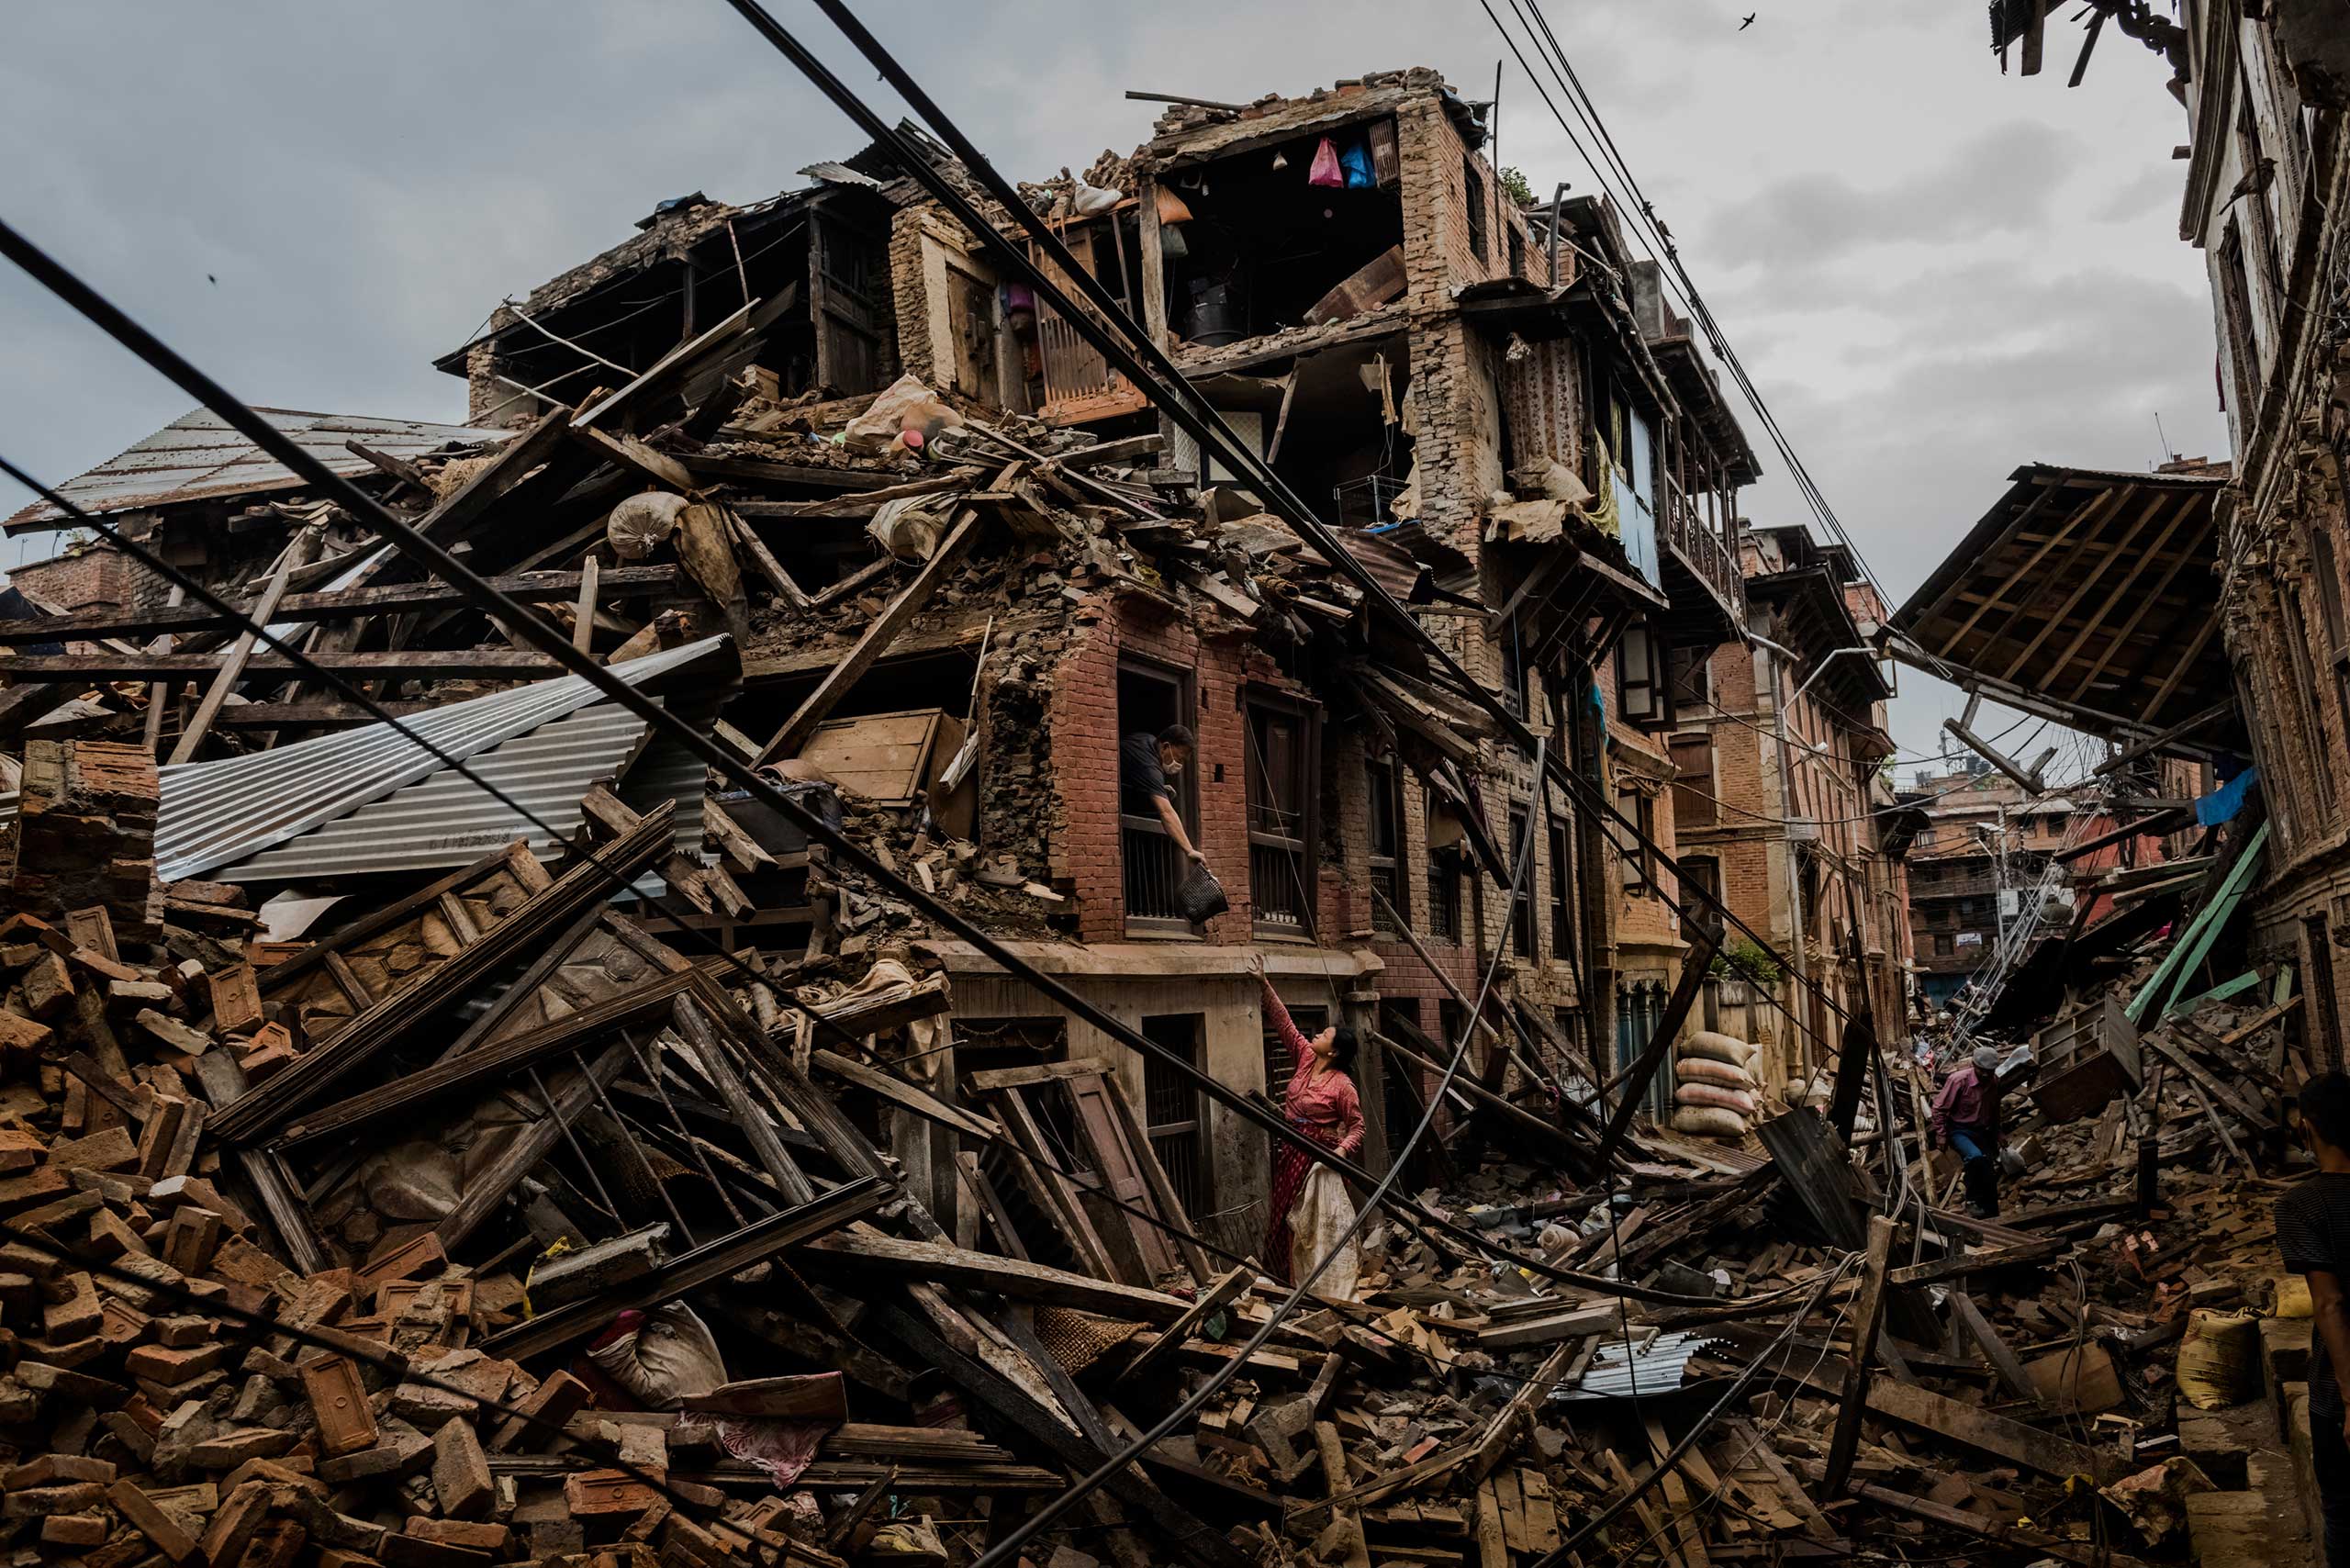 A husband passed salvaged belongings to his wife through the window of their earthquake-destroyed home in Bhaktapur, Nepal. In the days following the 7.8 magnitude quake, residents cautiously returned to collect whatever valuables they could find. April 29, 2015.